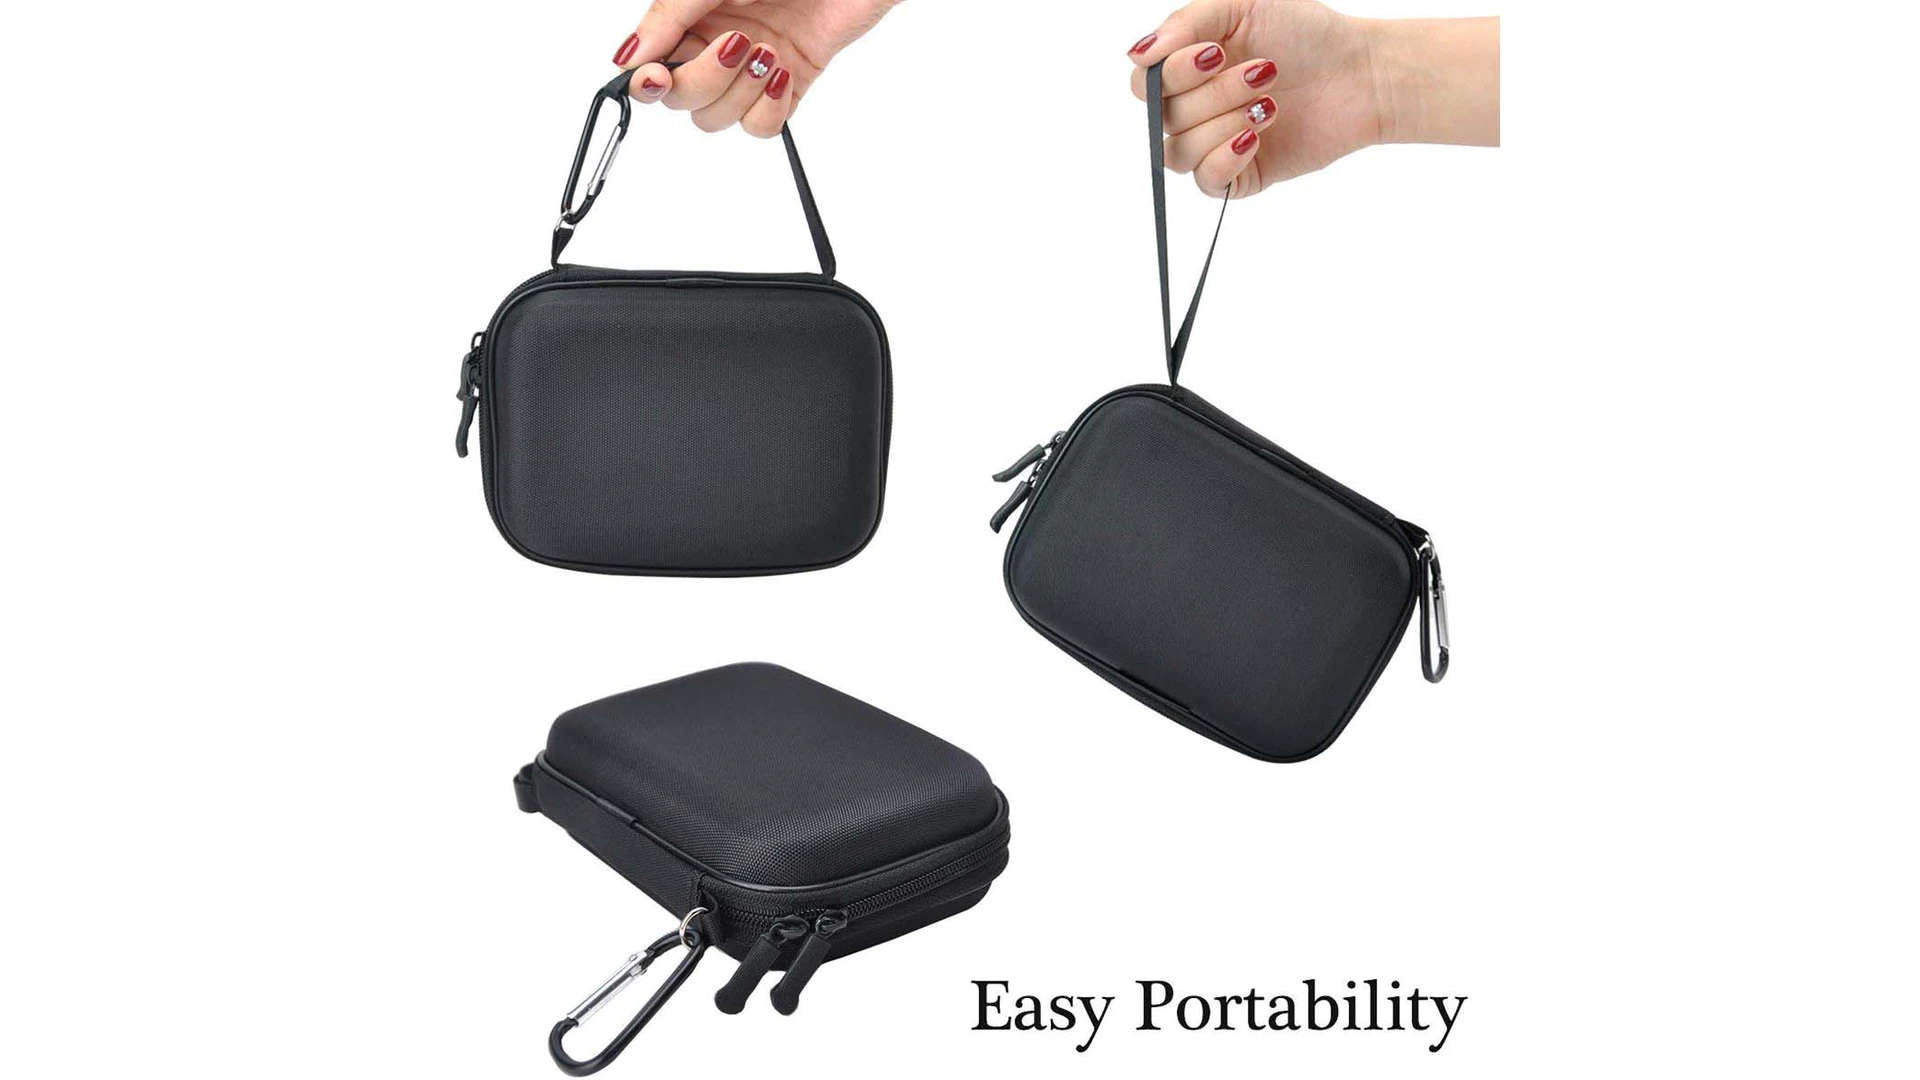 Prosperity eva bag first aid pouch for hard drive